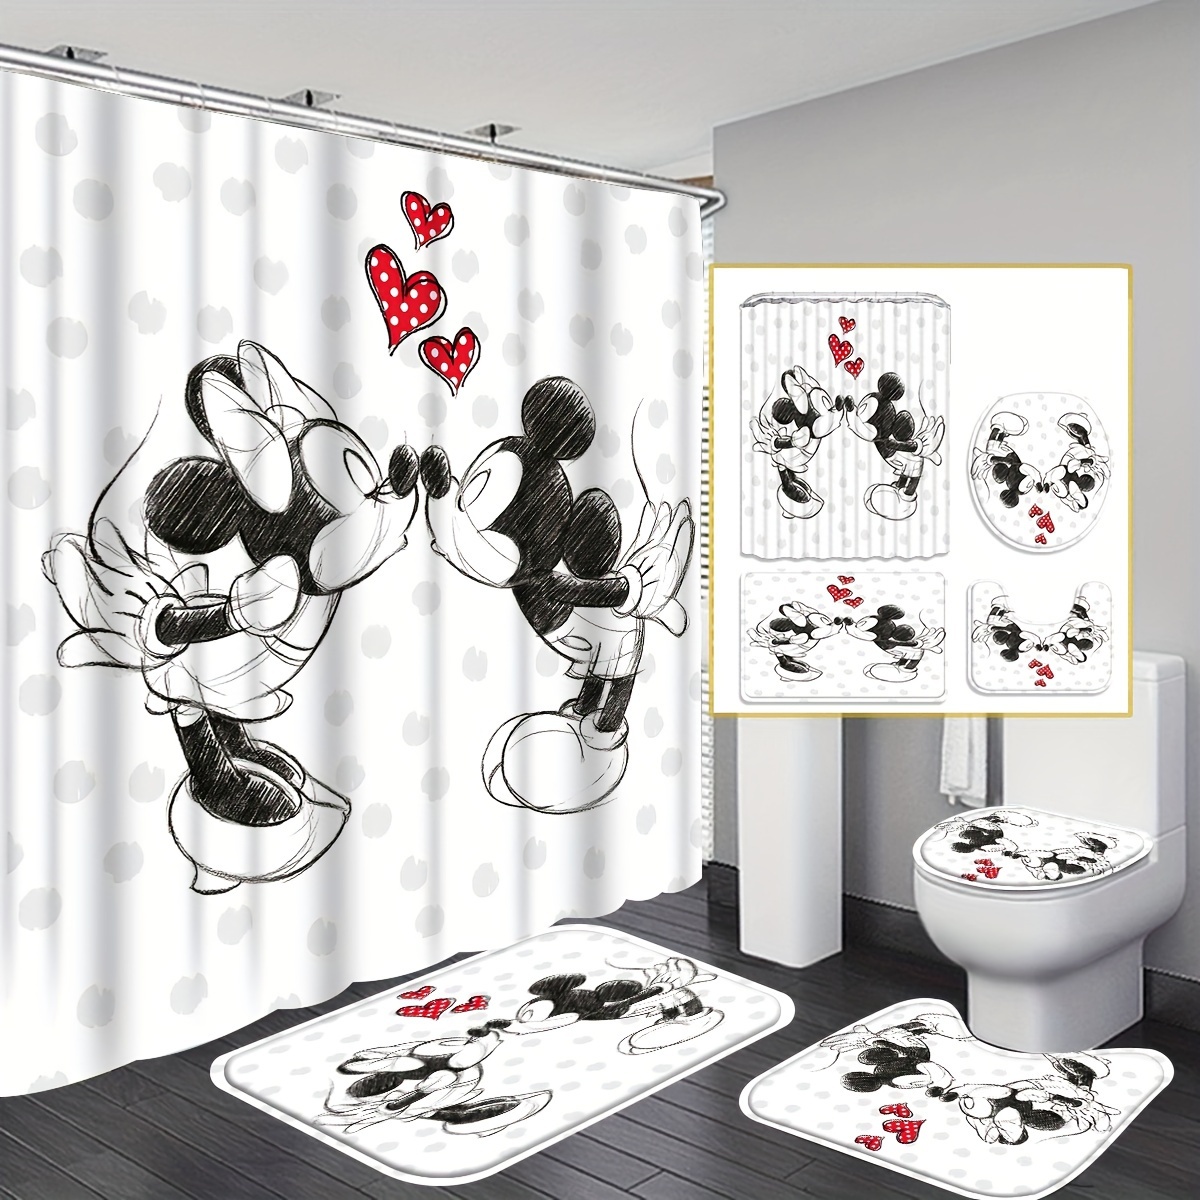 

Disney Mickey Mouse 4-piece Shower Curtain Set - Waterproof, Includes Non-slip Bath Mat & U-shaped Toilet Rug With Hooks - Perfect For Bathroom Decor